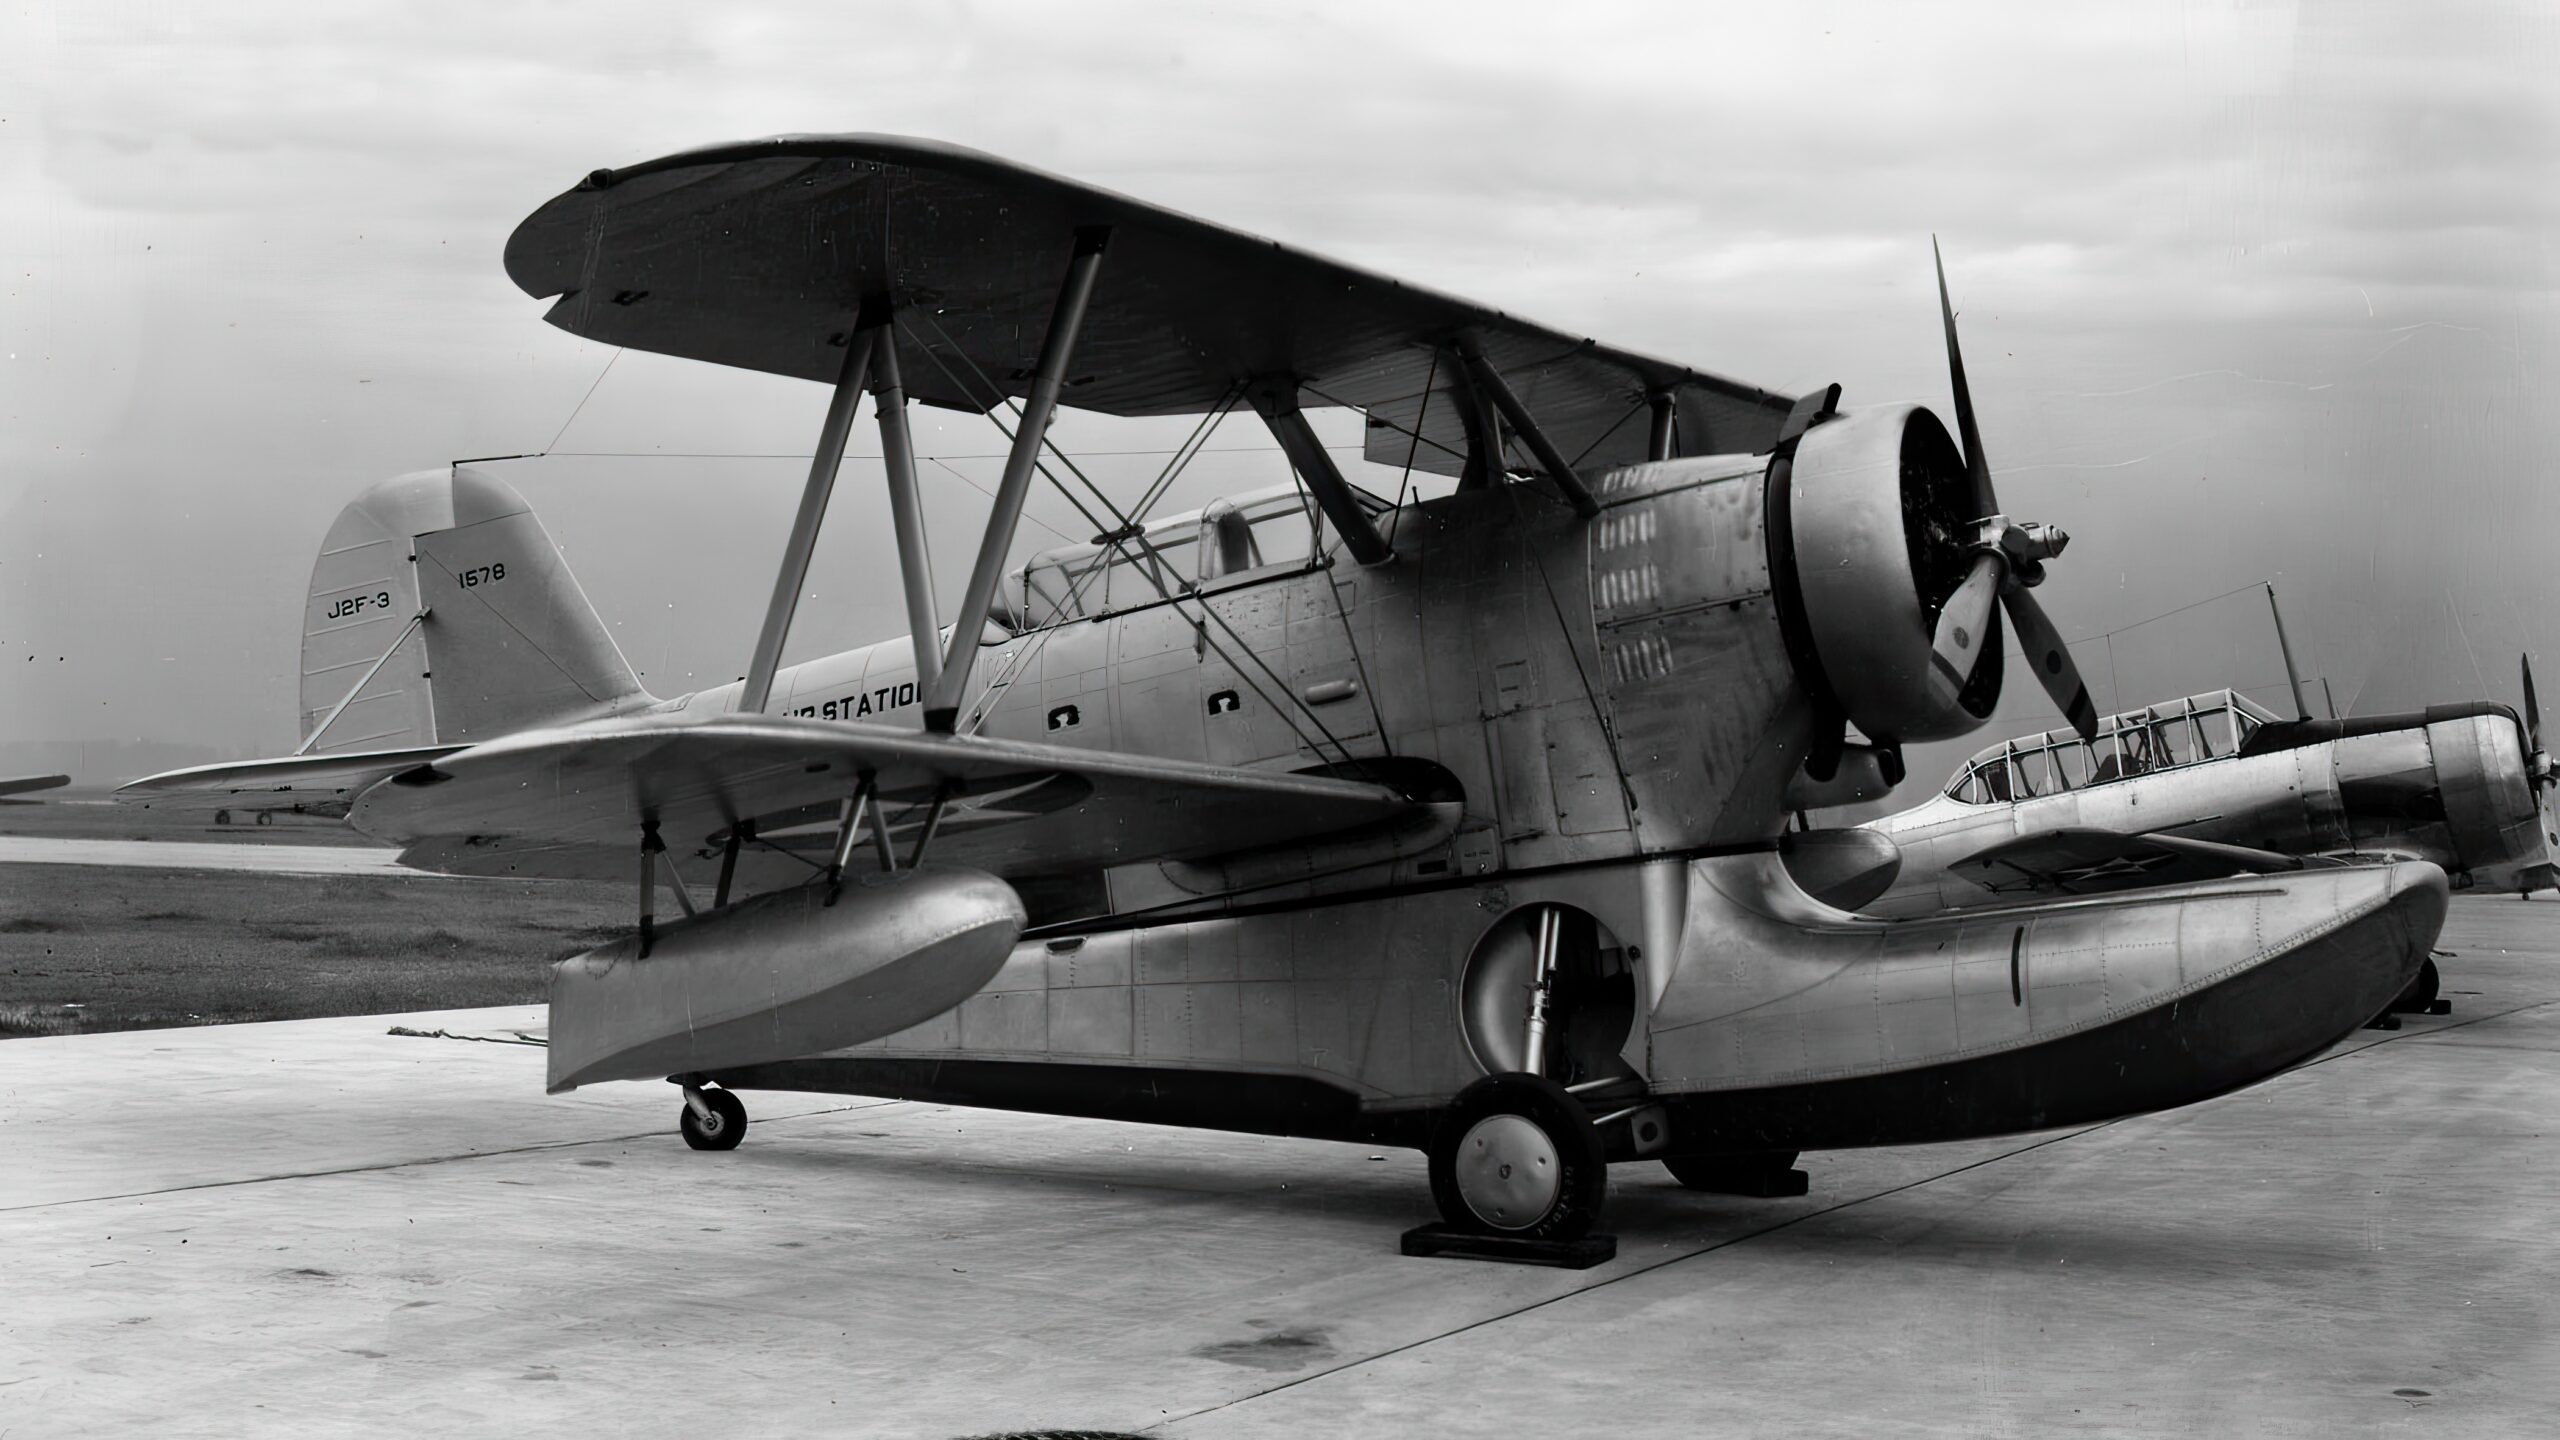 The first aircraft assigned to Naval Air Station Jacksonville, Florida (USA), was this Grumman J2F-3 Duck (BuNo 1578), which arrived on 16 January 1940